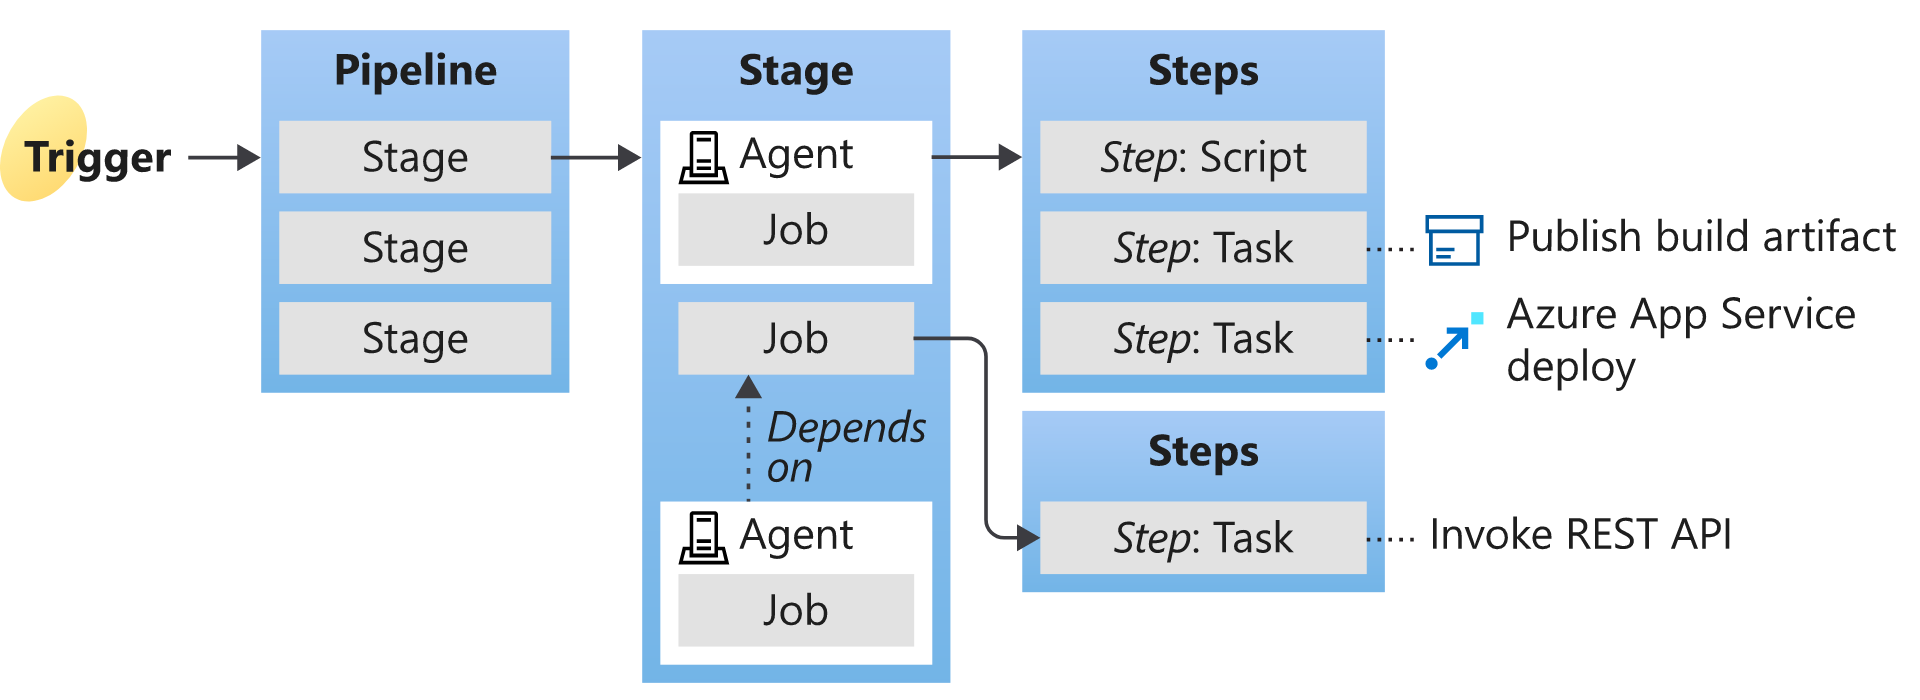 Key pipeline terms with a trigger action, starting the pipeline with multiple stages, using various jobs and tasks to create a build artifact, and start the deployment.